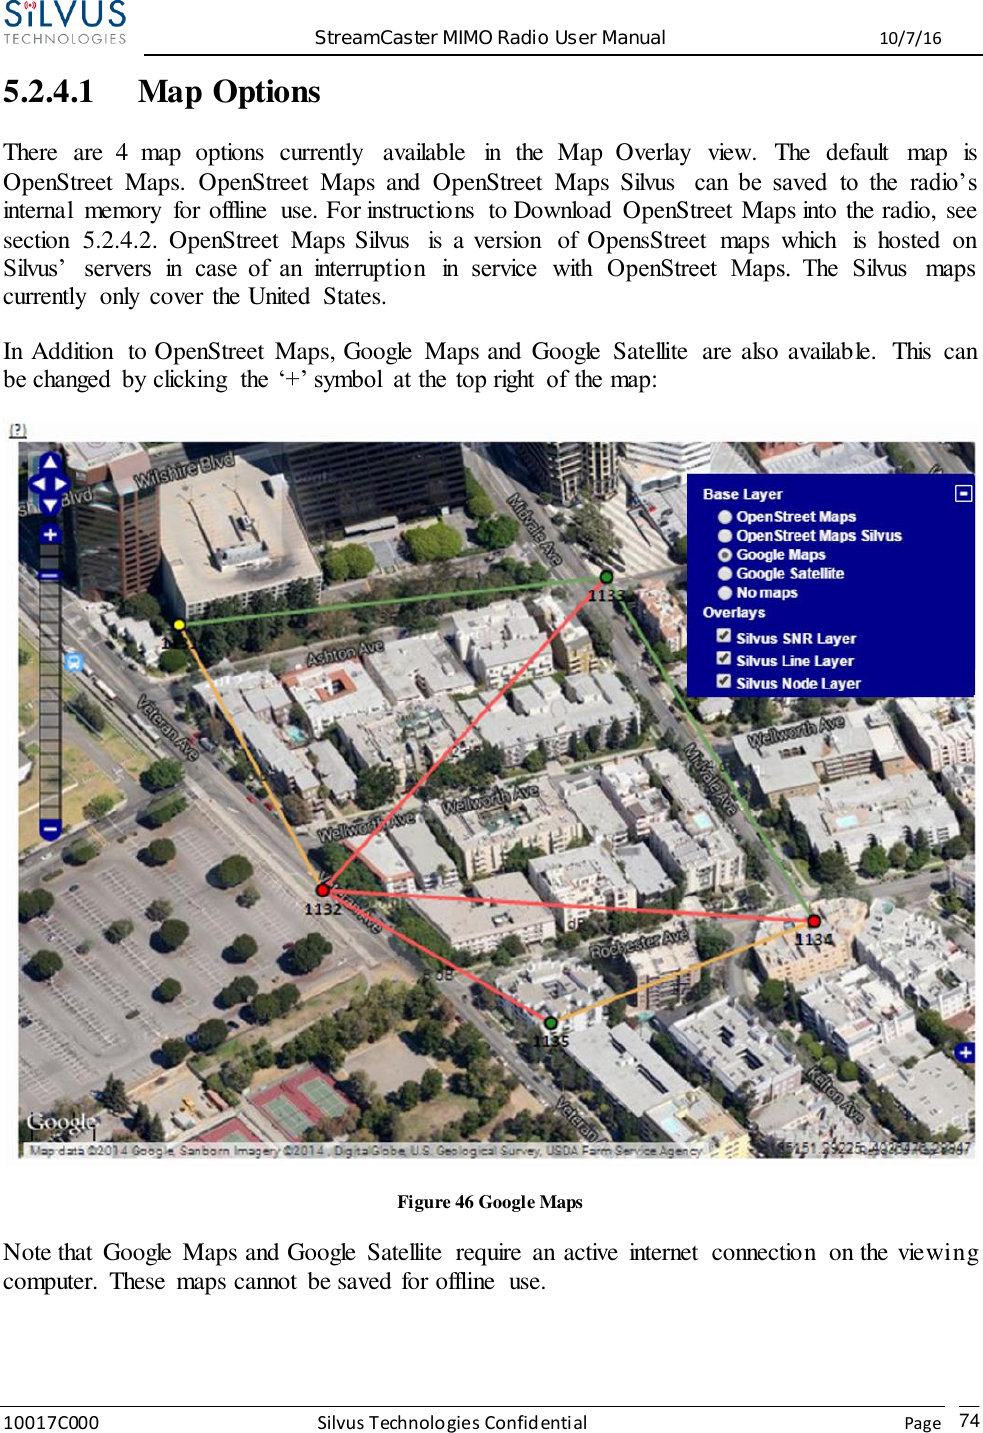  StreamCaster MIMO Radio User Manual  10/7/16 10017C000 Silvus Technologies Confidential    Page   74 5.2.4.1 Map Options There  are  4  map  options  currently  available  in  the  Map  Overlay  view.  The  default  map  is OpenStreet  Maps.  OpenStreet  Maps  and  OpenStreet  Maps  Silvus  can  be  saved  to  the  radio’s internal  memory  for offline  use. For instructions  to Download  OpenStreet Maps into the radio, see section  5.2.4.2.  OpenStreet  Maps Silvus  is  a version  of  OpensStreet  maps  which  is  hosted  on Silvus’  servers  in  case  of  an  interruption  in  service  with  OpenStreet  Maps.  The  Silvus  maps currently  only  cover the United  States.  In Addition  to OpenStreet  Maps, Google  Maps and Google  Satellite  are also available.  This  can be changed  by clicking  the  ‘+’ symbol  at the  top right  of  the map:  Figure 46 Google Maps Note that  Google  Maps and Google  Satellite  require  an active  internet  connection  on the viewing computer.  These  maps cannot  be saved for offline  use.   